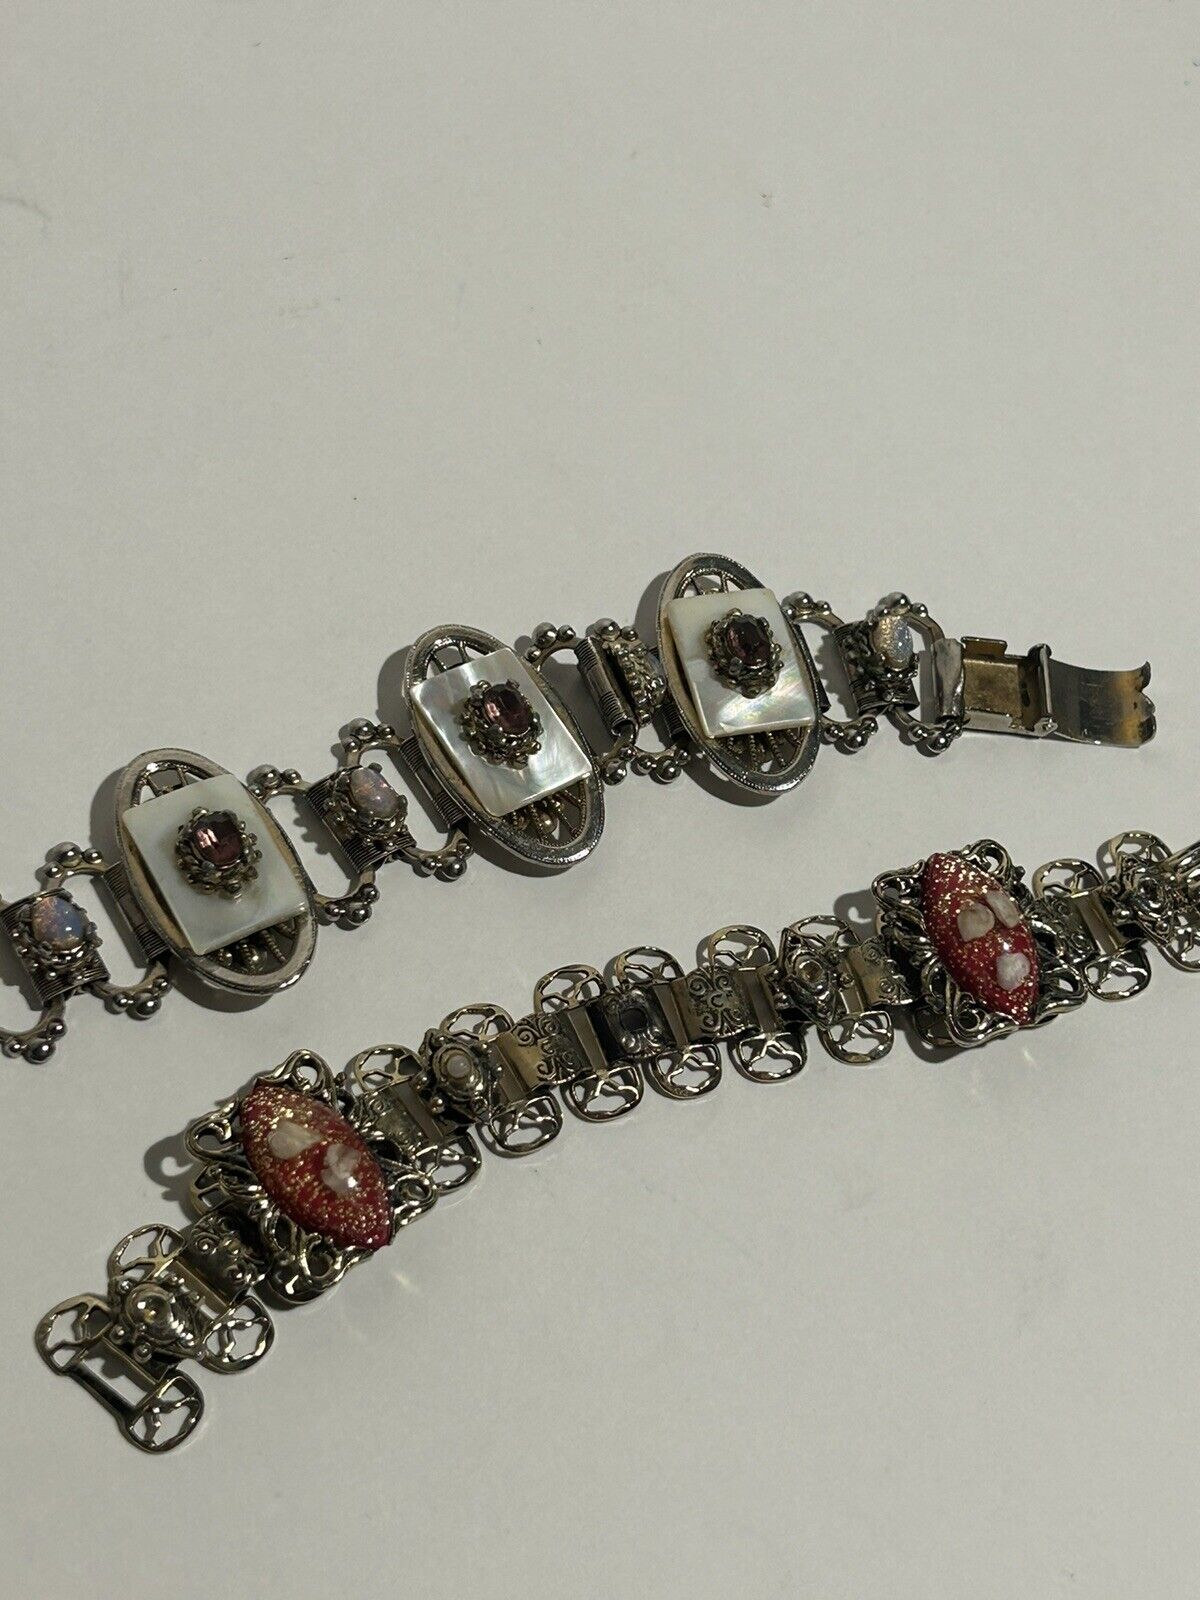 2Vintage Silver Tone Molded Glass Faux Pearl Chain Link Bracelet Fold Over Clasp